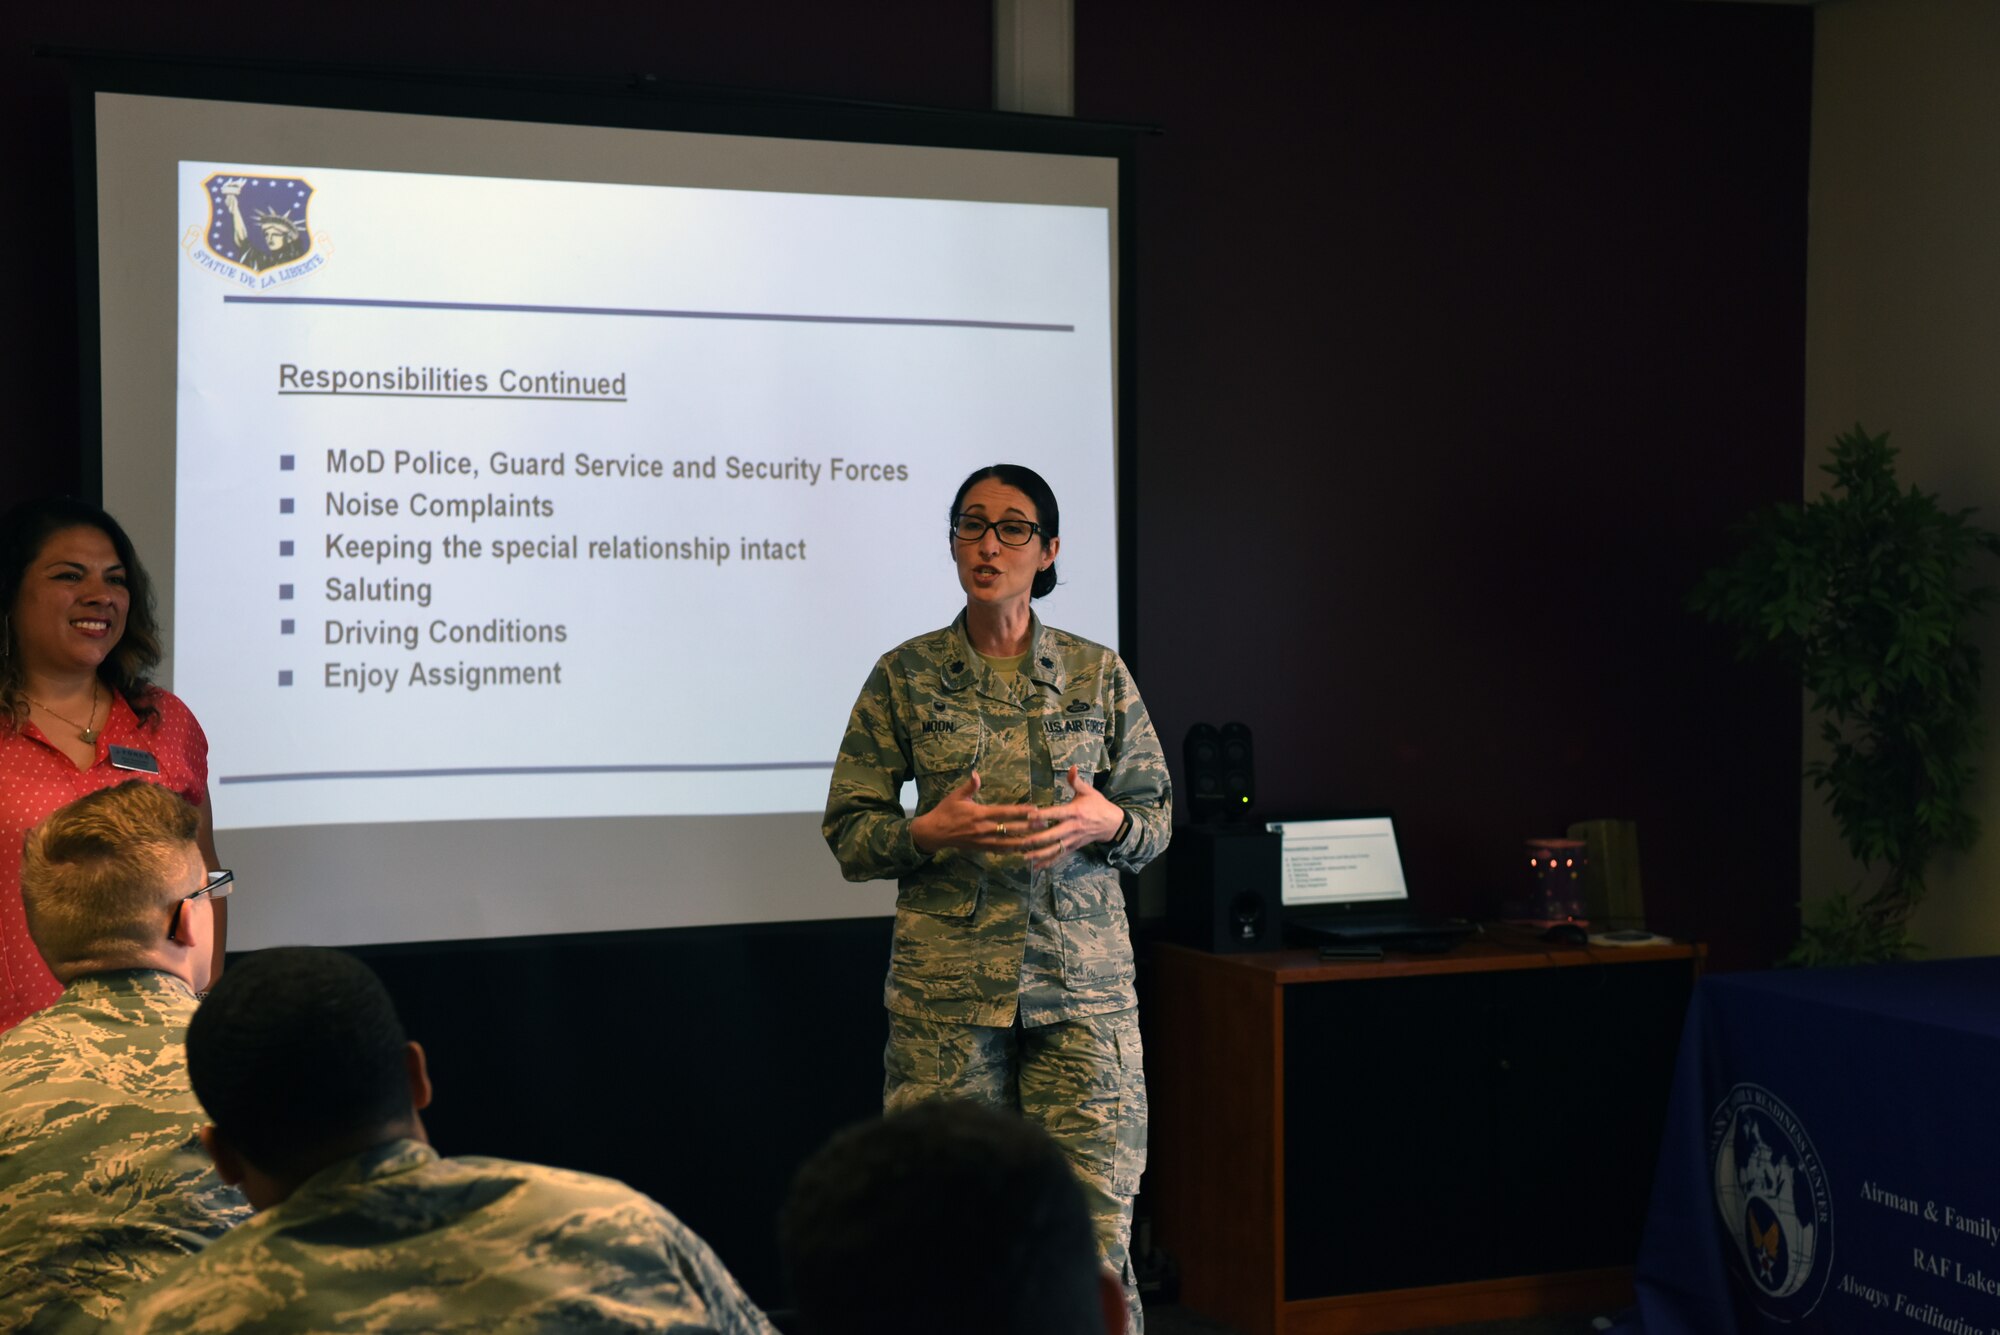 Lt. Col. Kelli R. Moon, commander of the 48th Force Support Squadron, speaks to newly arrived Airmen at the Airman & Family Readiness Center as part of the 48th Force Support Squadron's "You Got Served" events at Royal Air Force Lakenheath, England, May 8, 2018.During the event Lt. Col. Moon and civilians at the 48th Force Support Squadron Marketing section selected two Airmen to recieve a $10 gift card each. (U.S. Air Force Photo/ Airman 1st Class John A. Crawford)